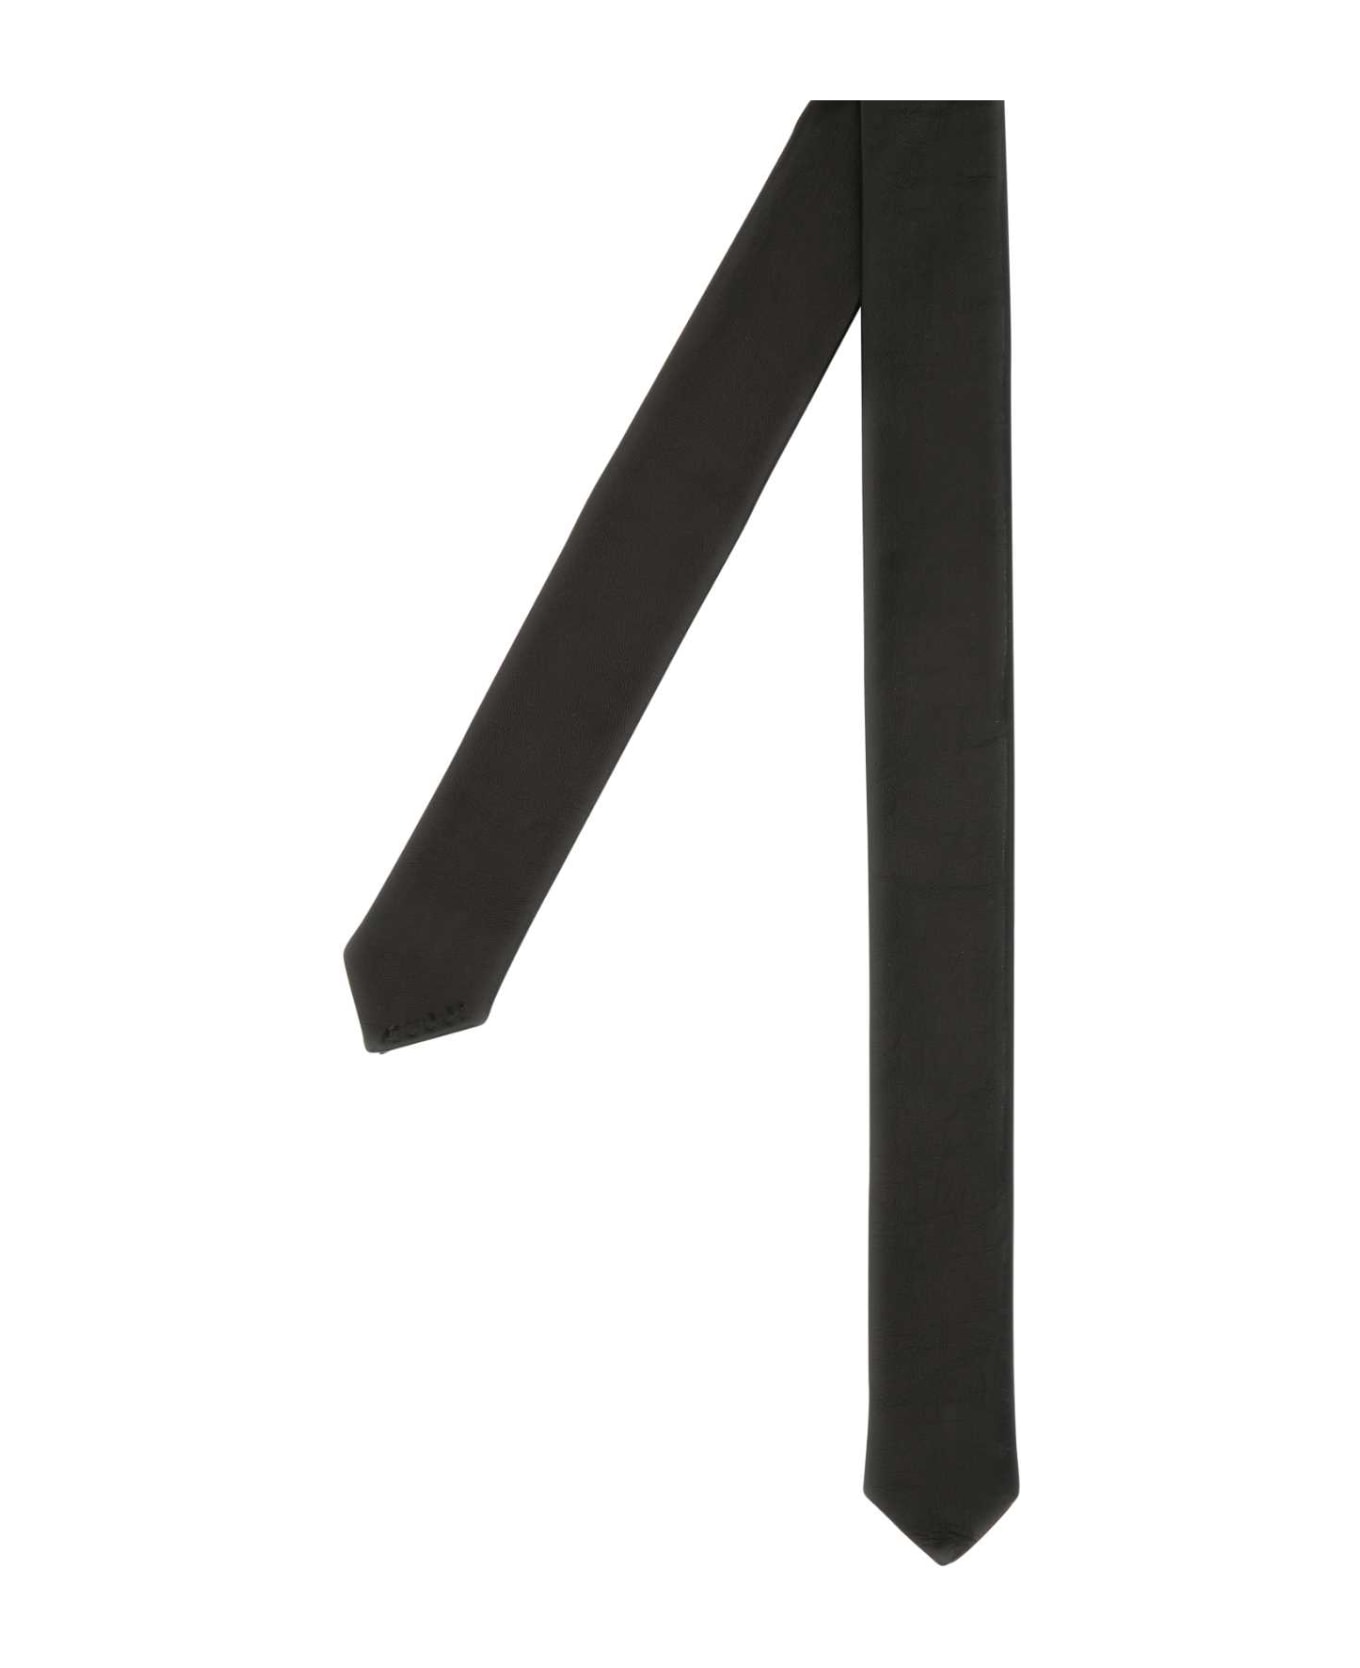 Gucci Black Leather Tie - 1000 ネクタイ